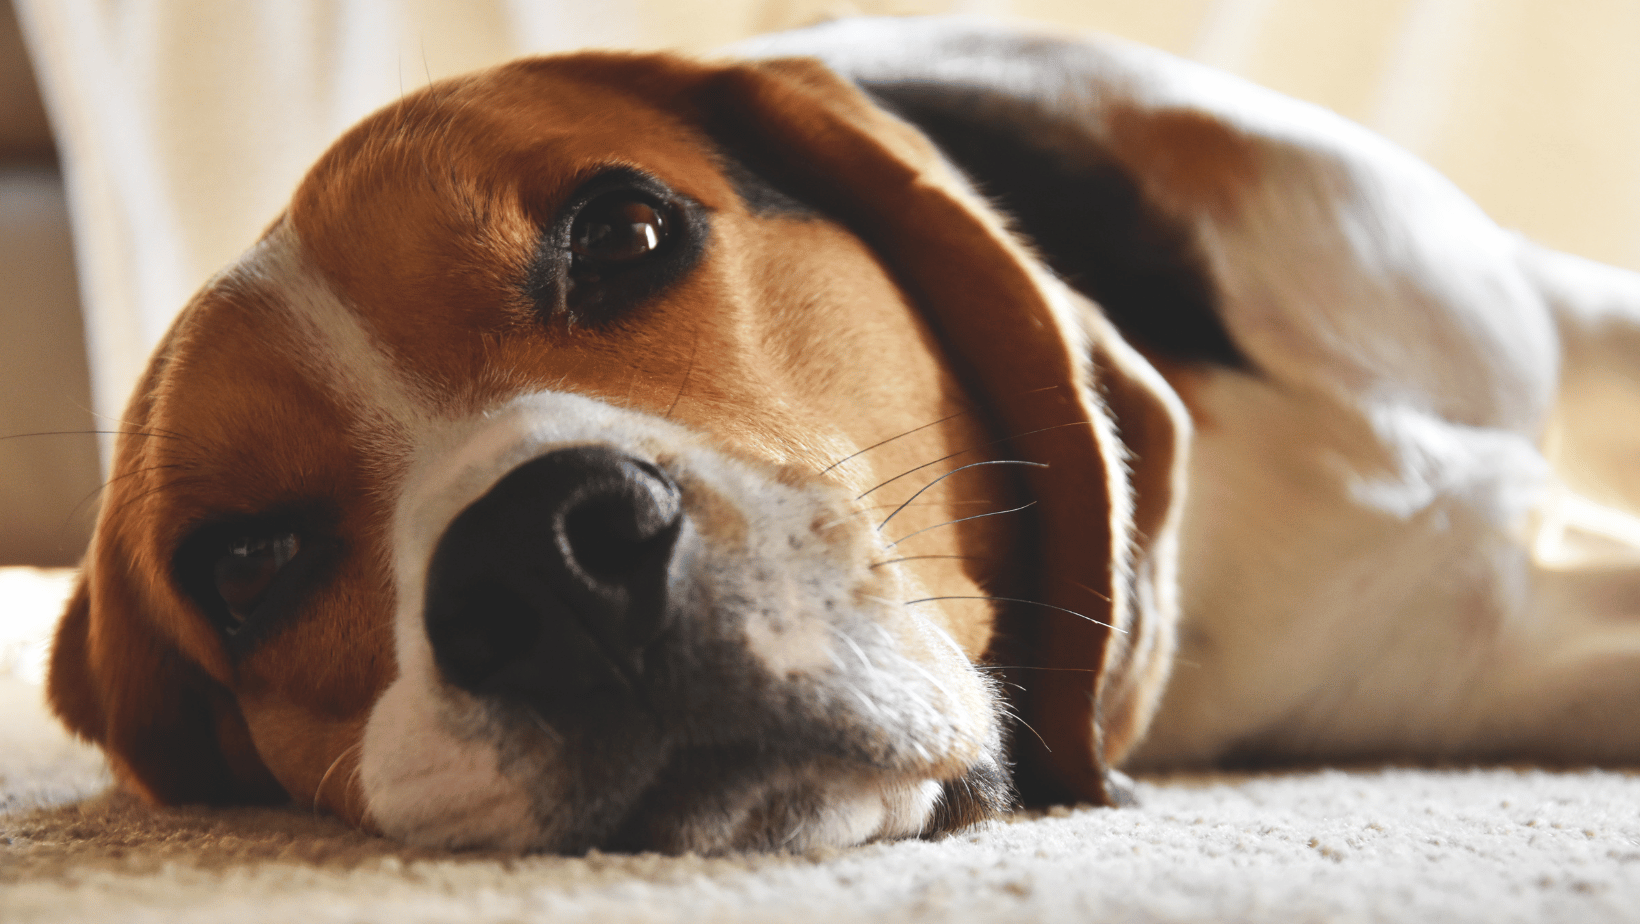 Pocket Beagles – The Canine Breed Miniature in Size but Big on Love